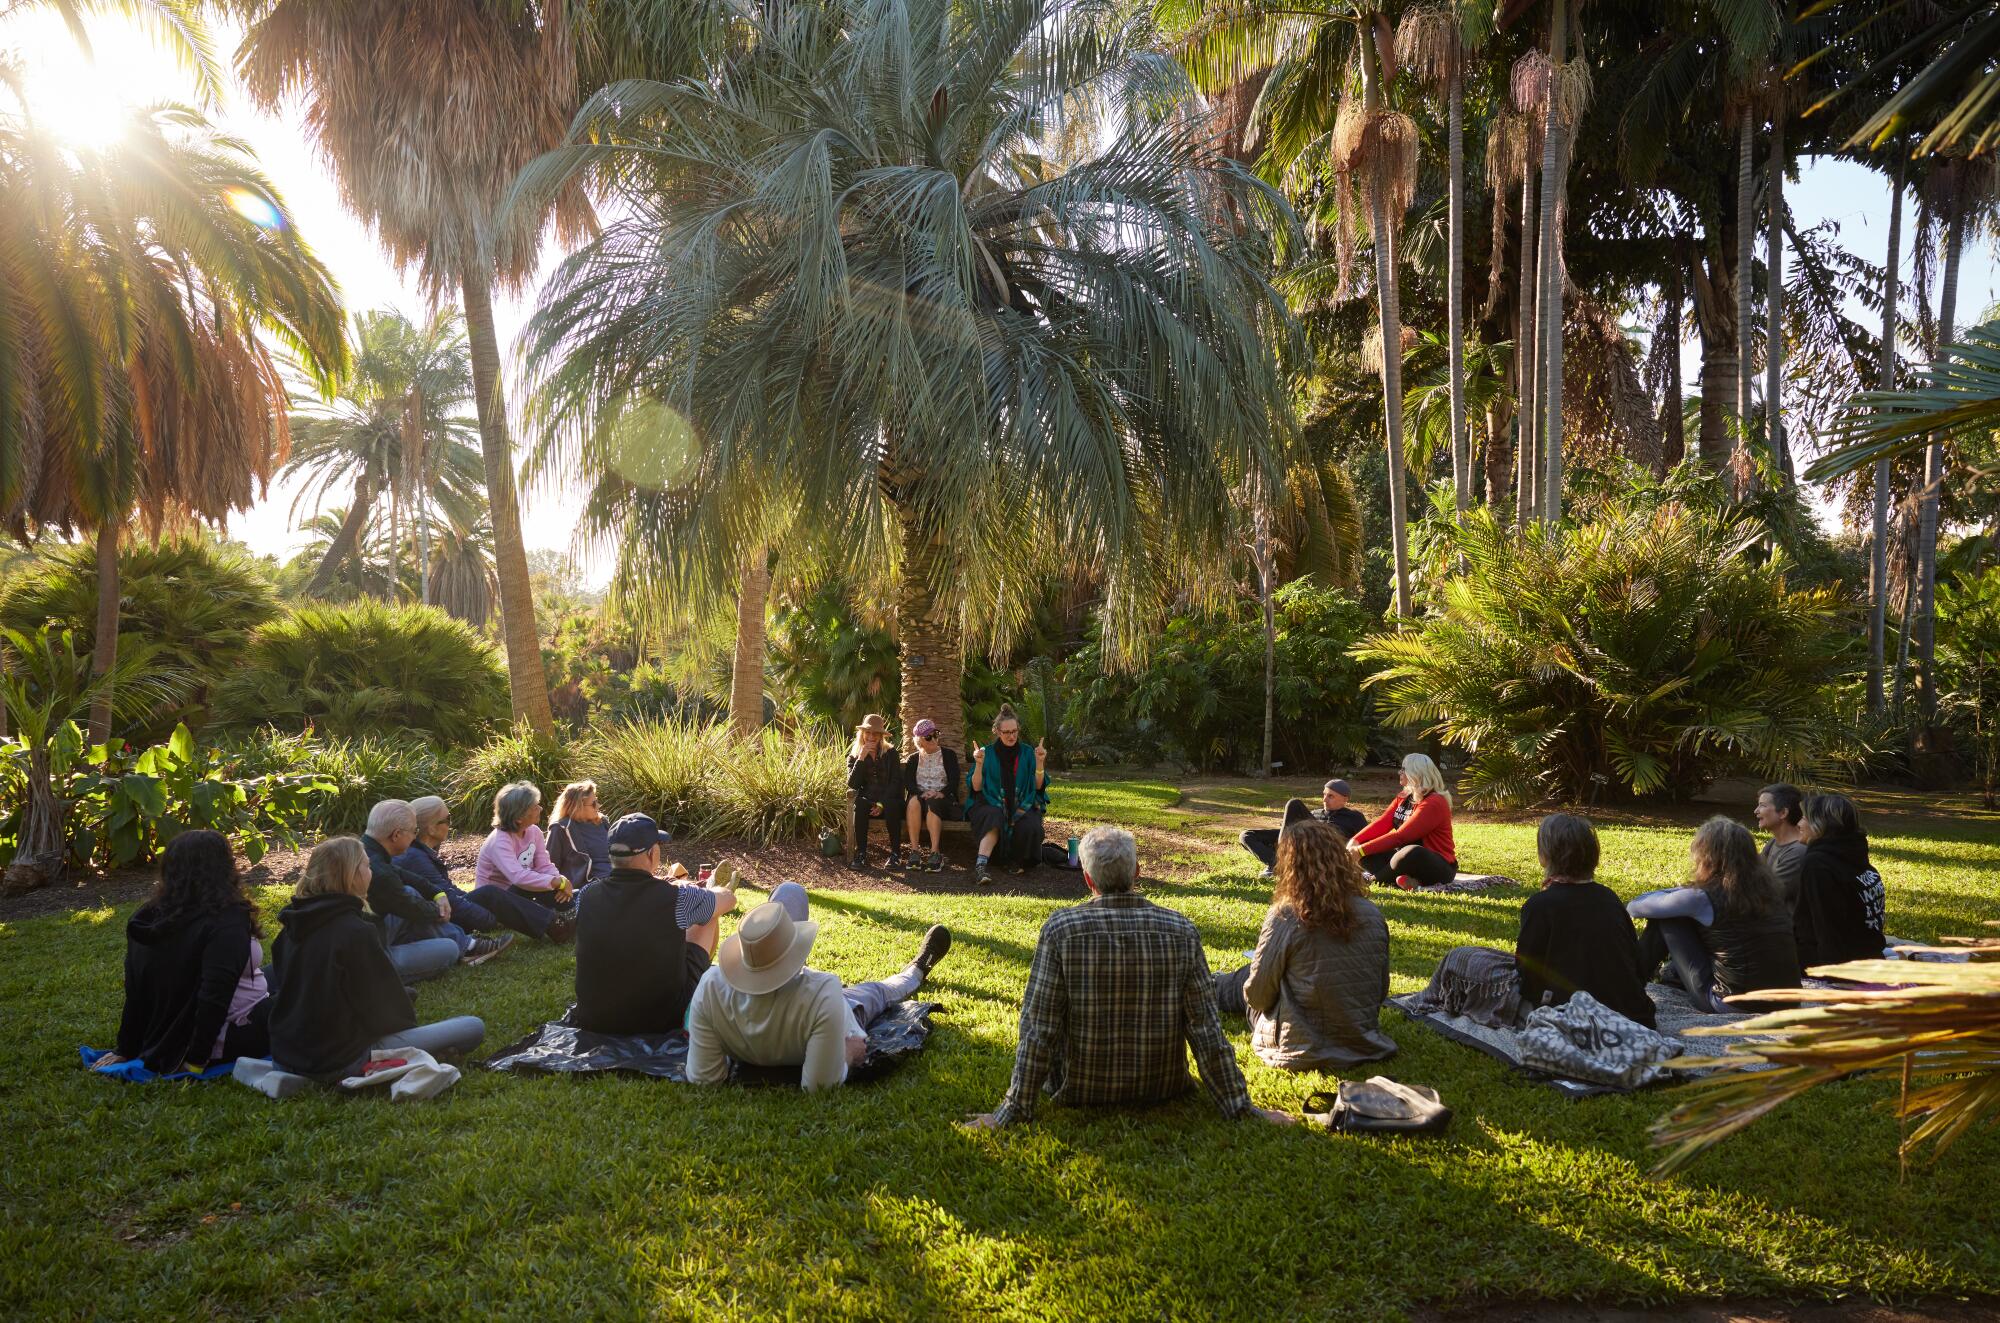 About 18 people sit in a circle on the grass at the Huntington for a forest therapy session.